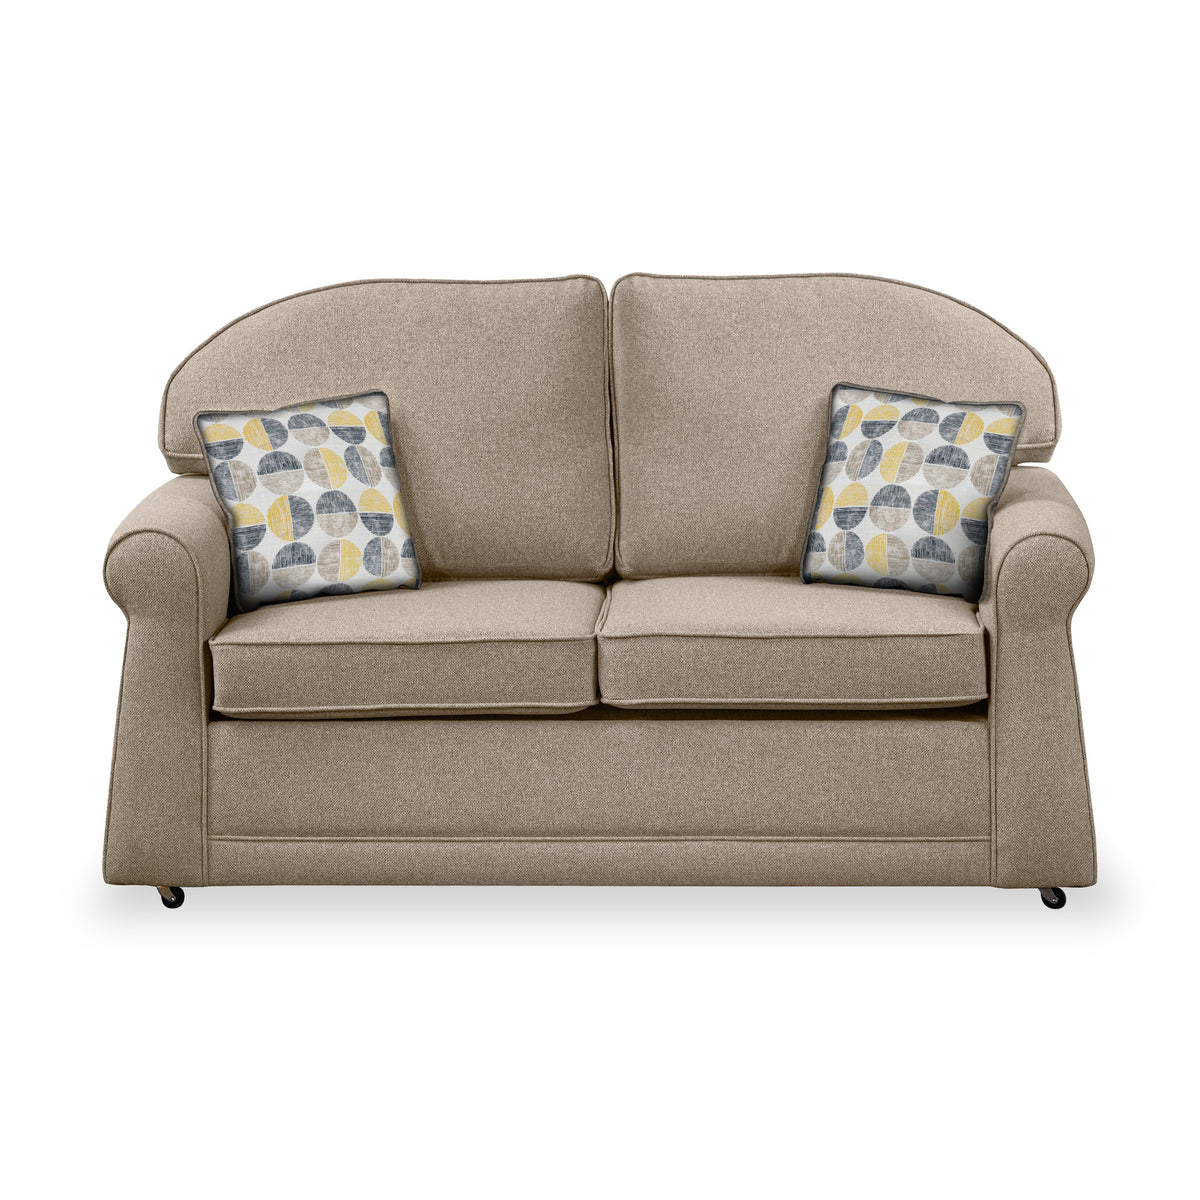 Croxdon Oatmeal Faux Linen 2 Seater Sofabed with Beige Scatter Cushions from Roseland Furniture